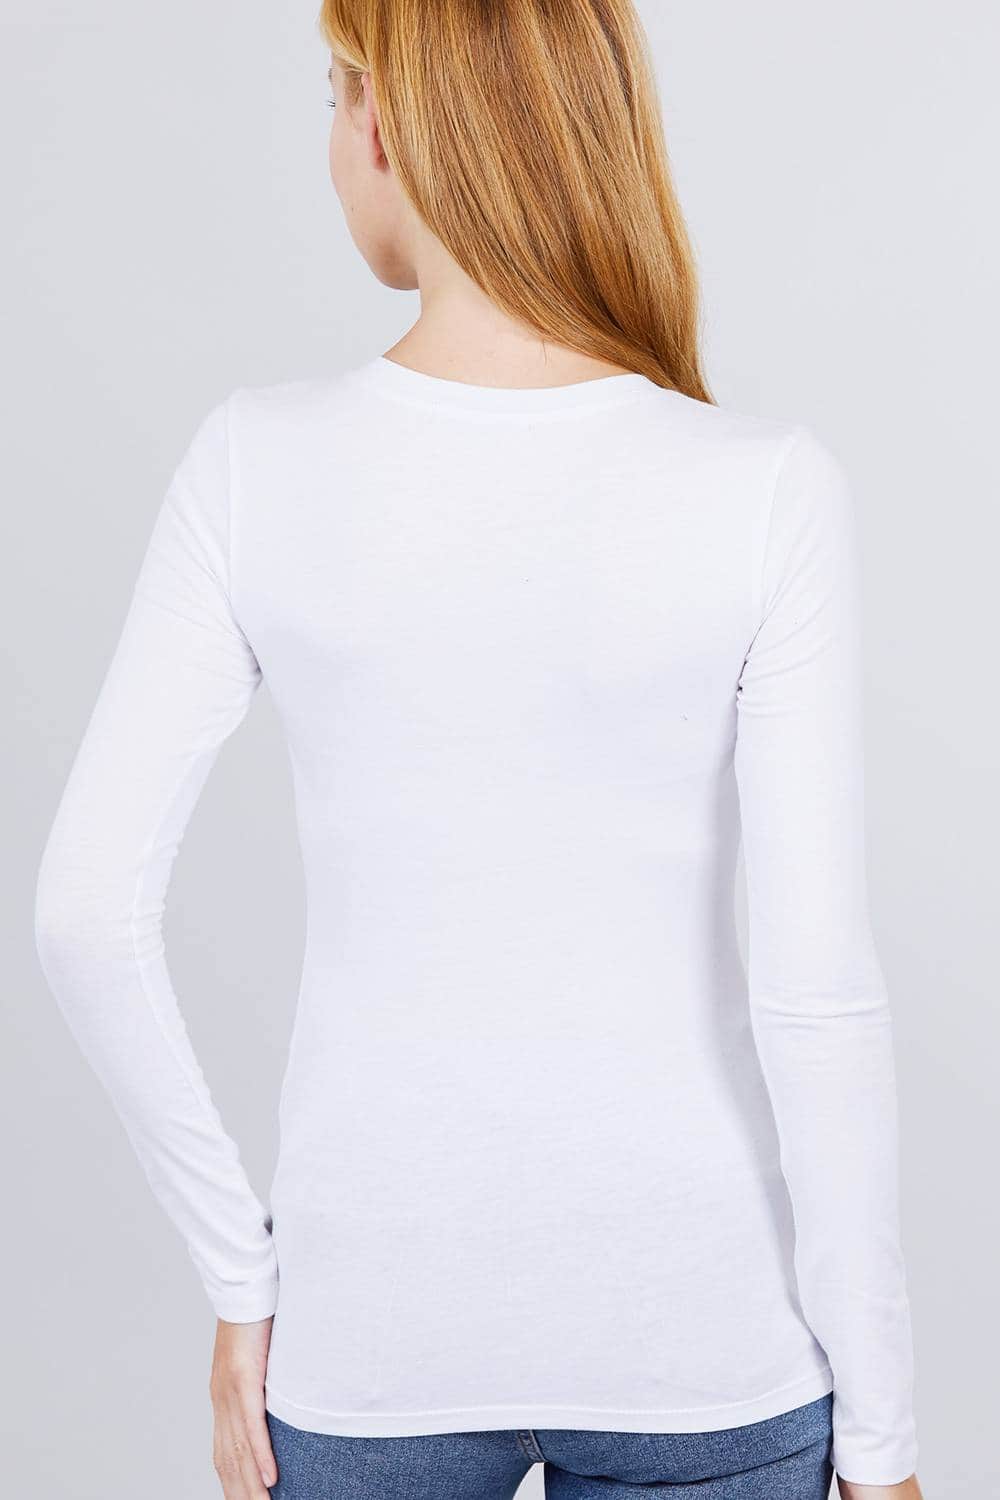 Cotton Jersey V-neck Top-TOPS / DRESSES-[Adult]-[Female]-Blue Zone Planet